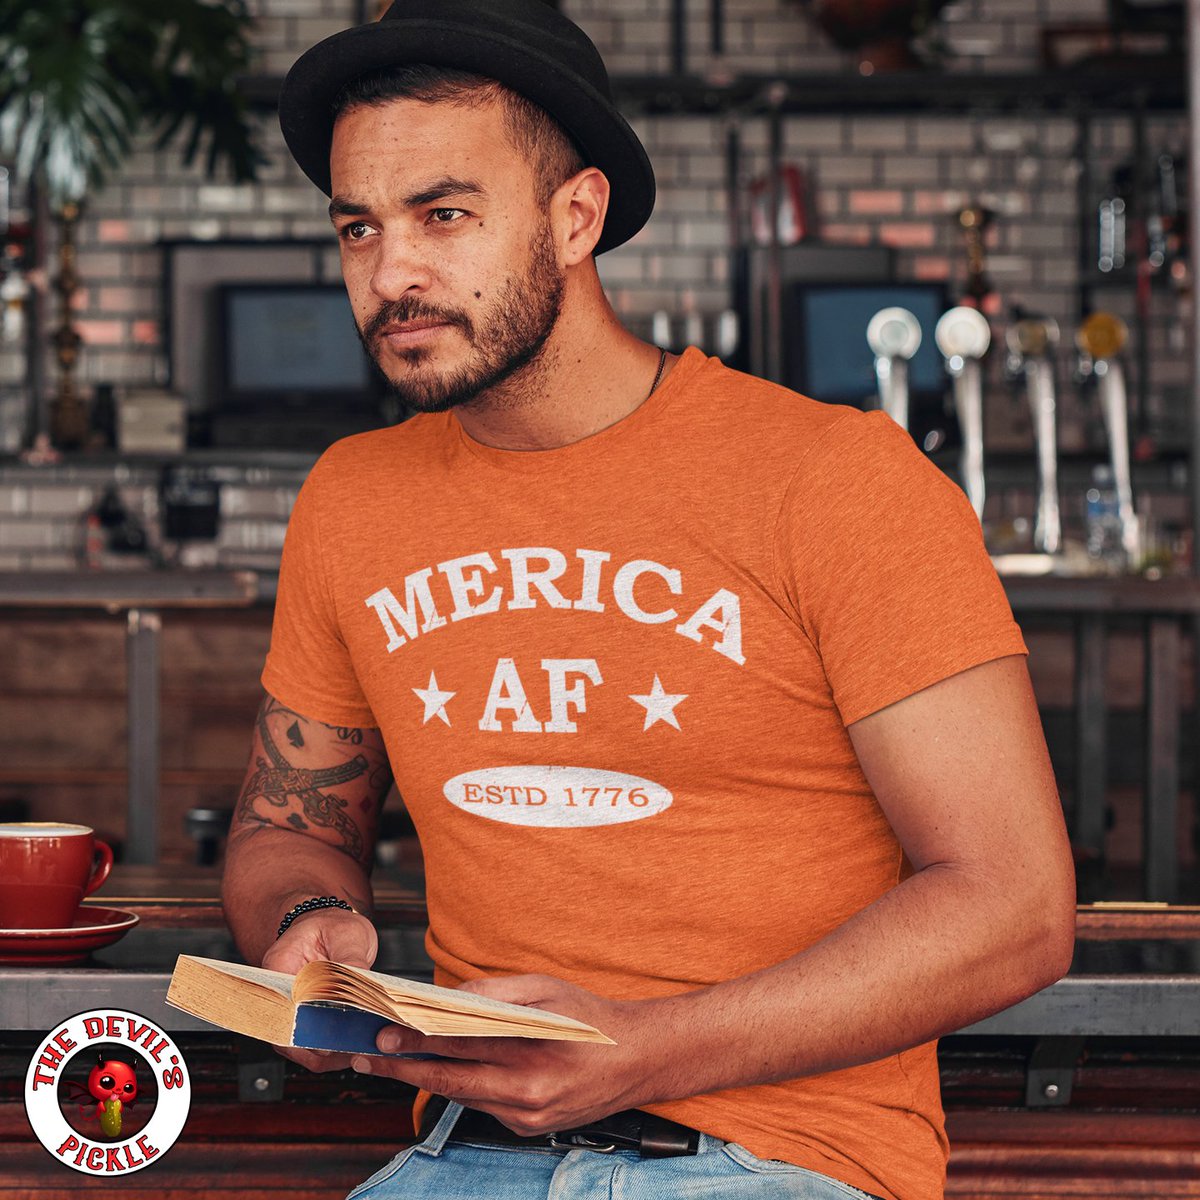 Feeling patriotic and proud as f*ck in my Merica AF Tee. 4th of July and Patriotic Tees, Hoodies and More Exclusively at The Devil's Pickle!

 #adulthumor #merica #offensivetshirts #adultinghumor #americanpride #american  #ProudAmerican #UnitedStates #patriot #hellyeahamerica